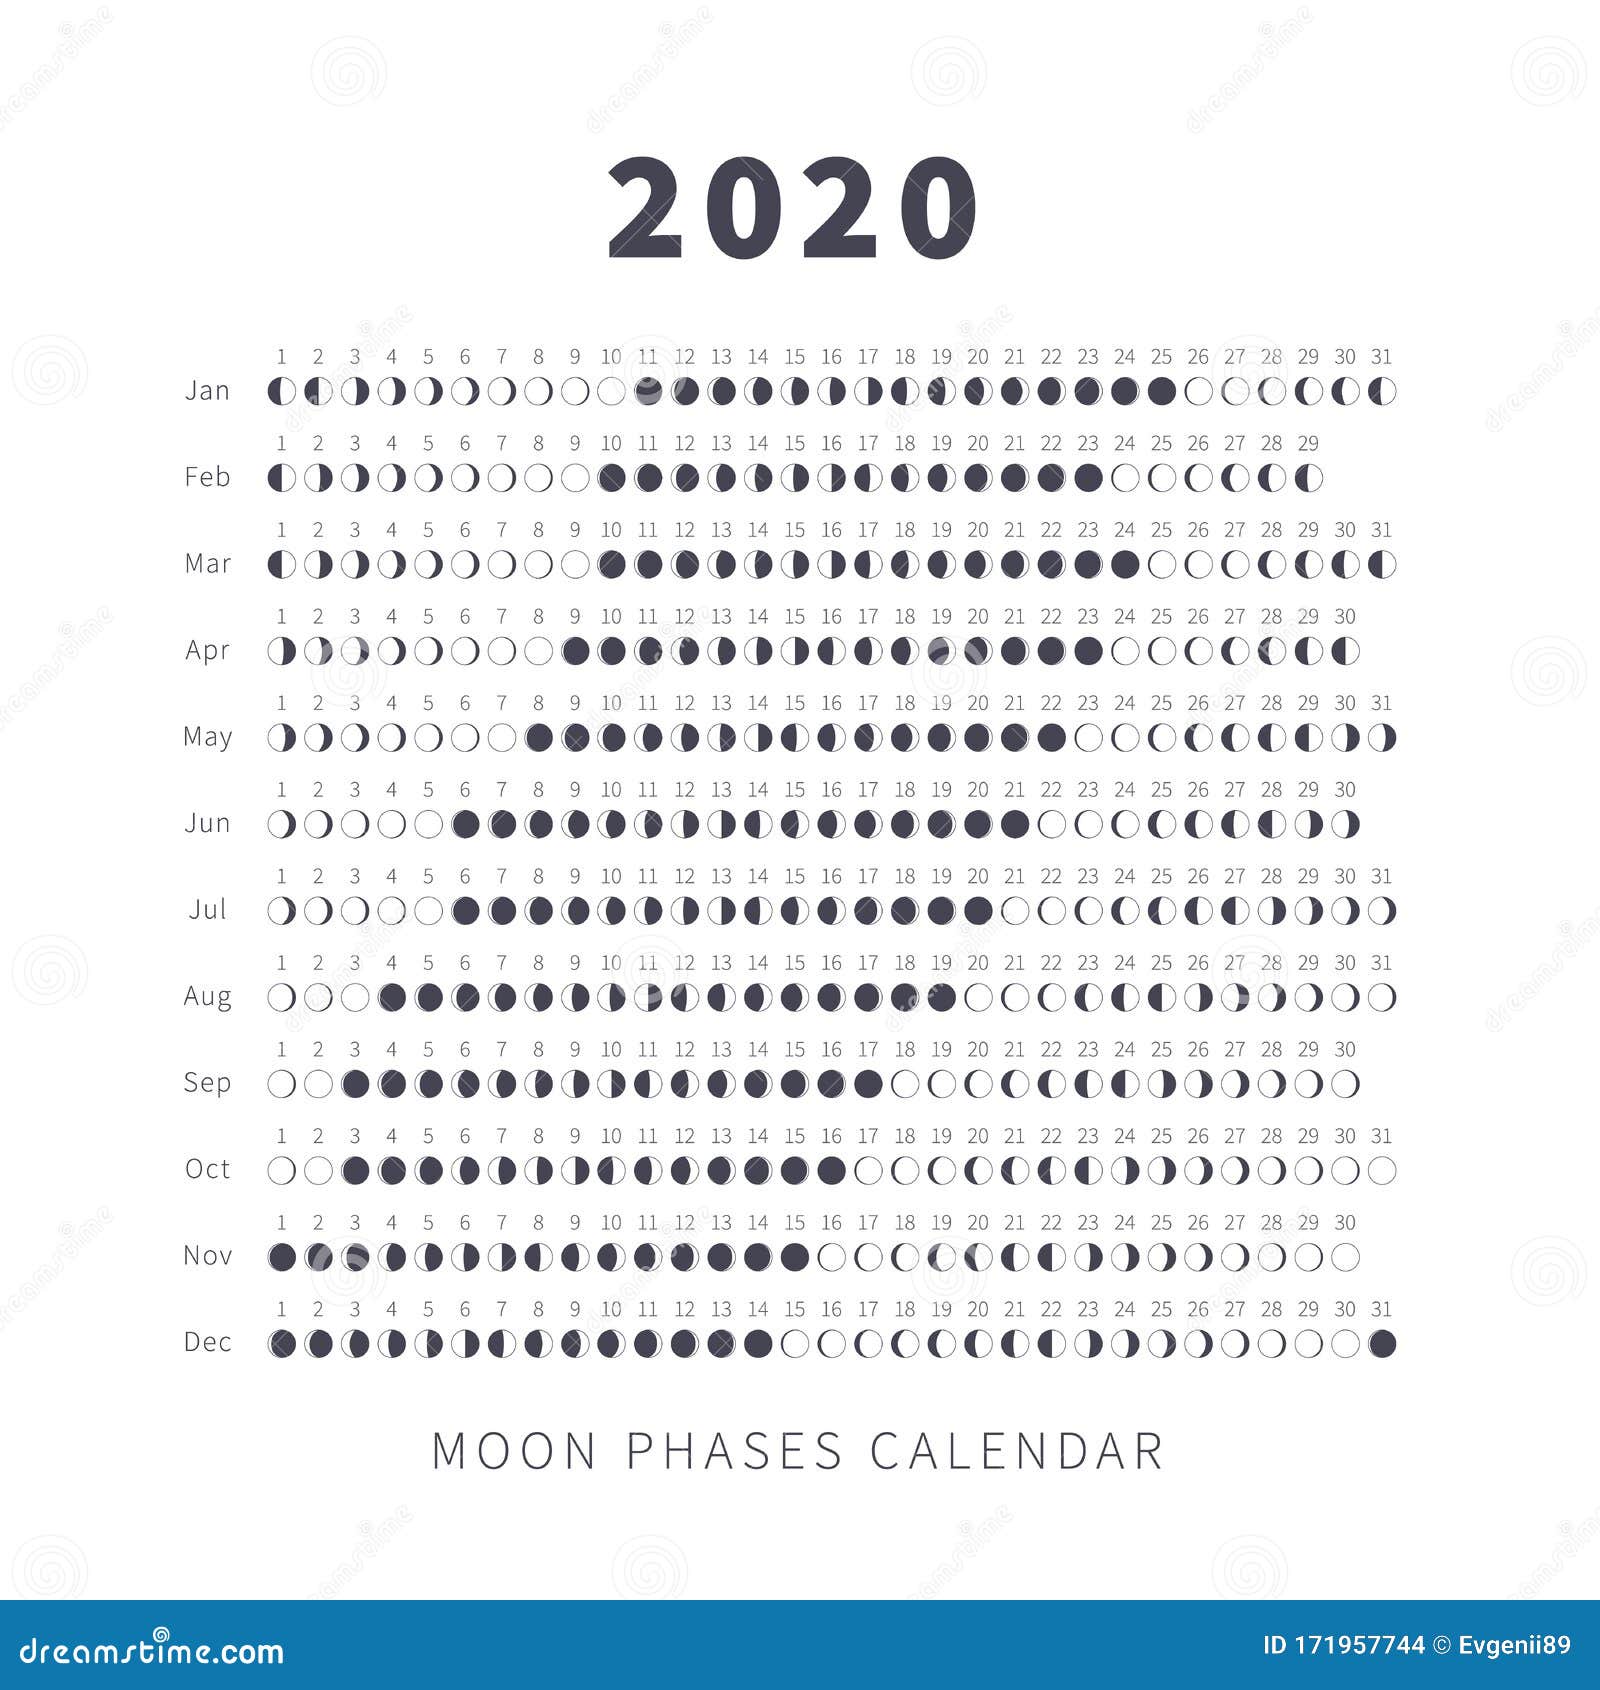 detailed moon calendar on 2020 year with phase on each day